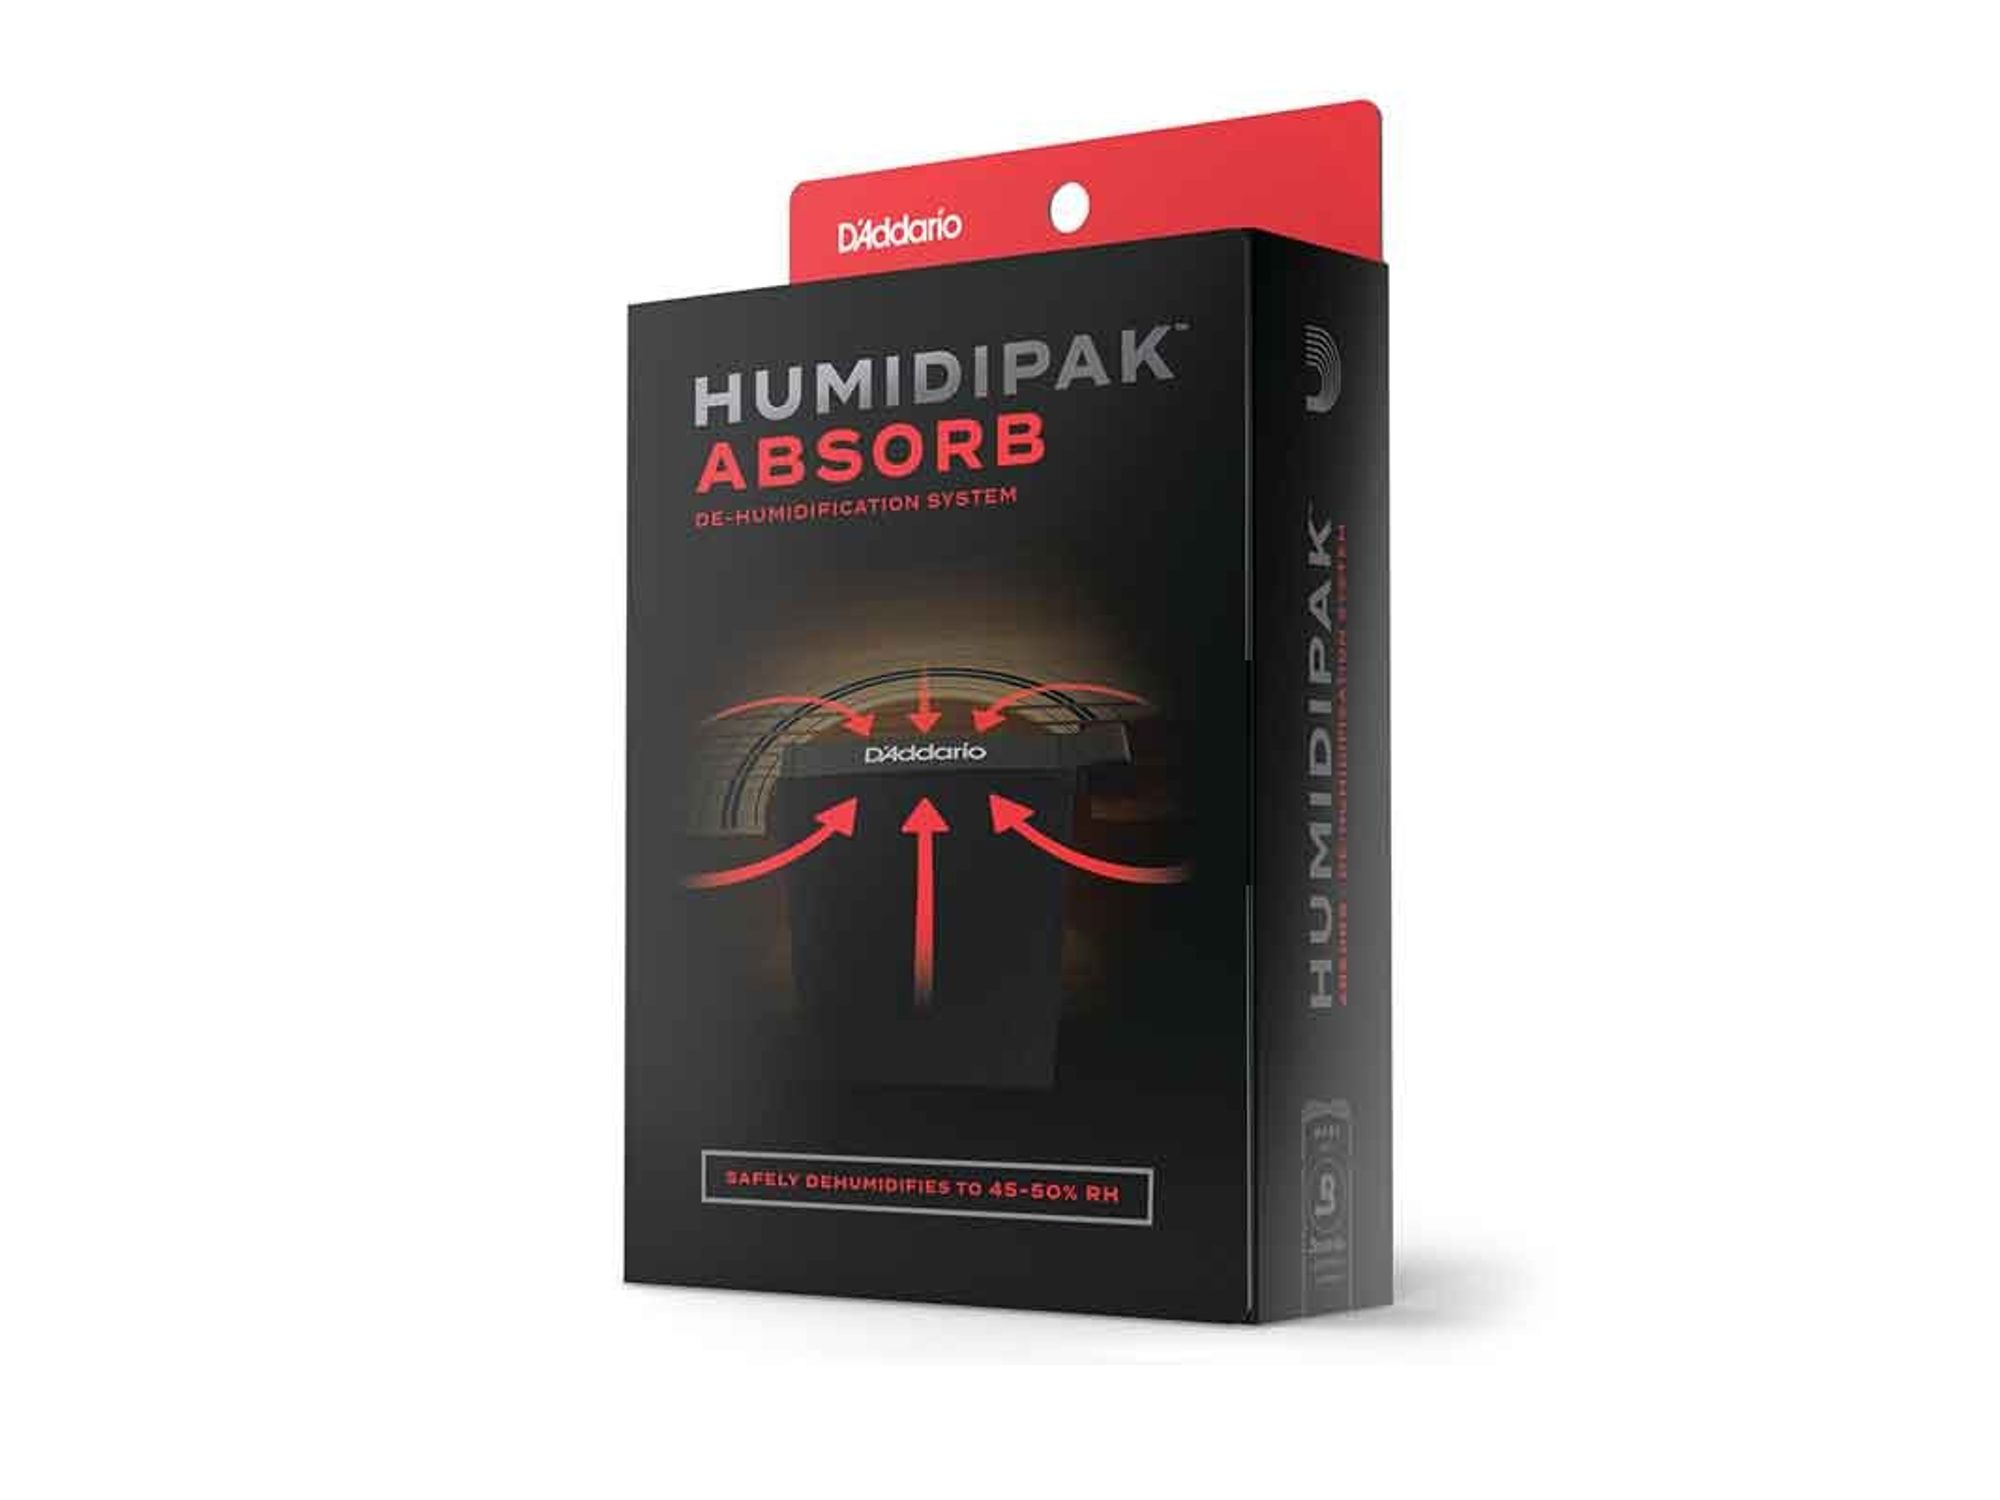 D’Addario Launches New Humidipak Absorb